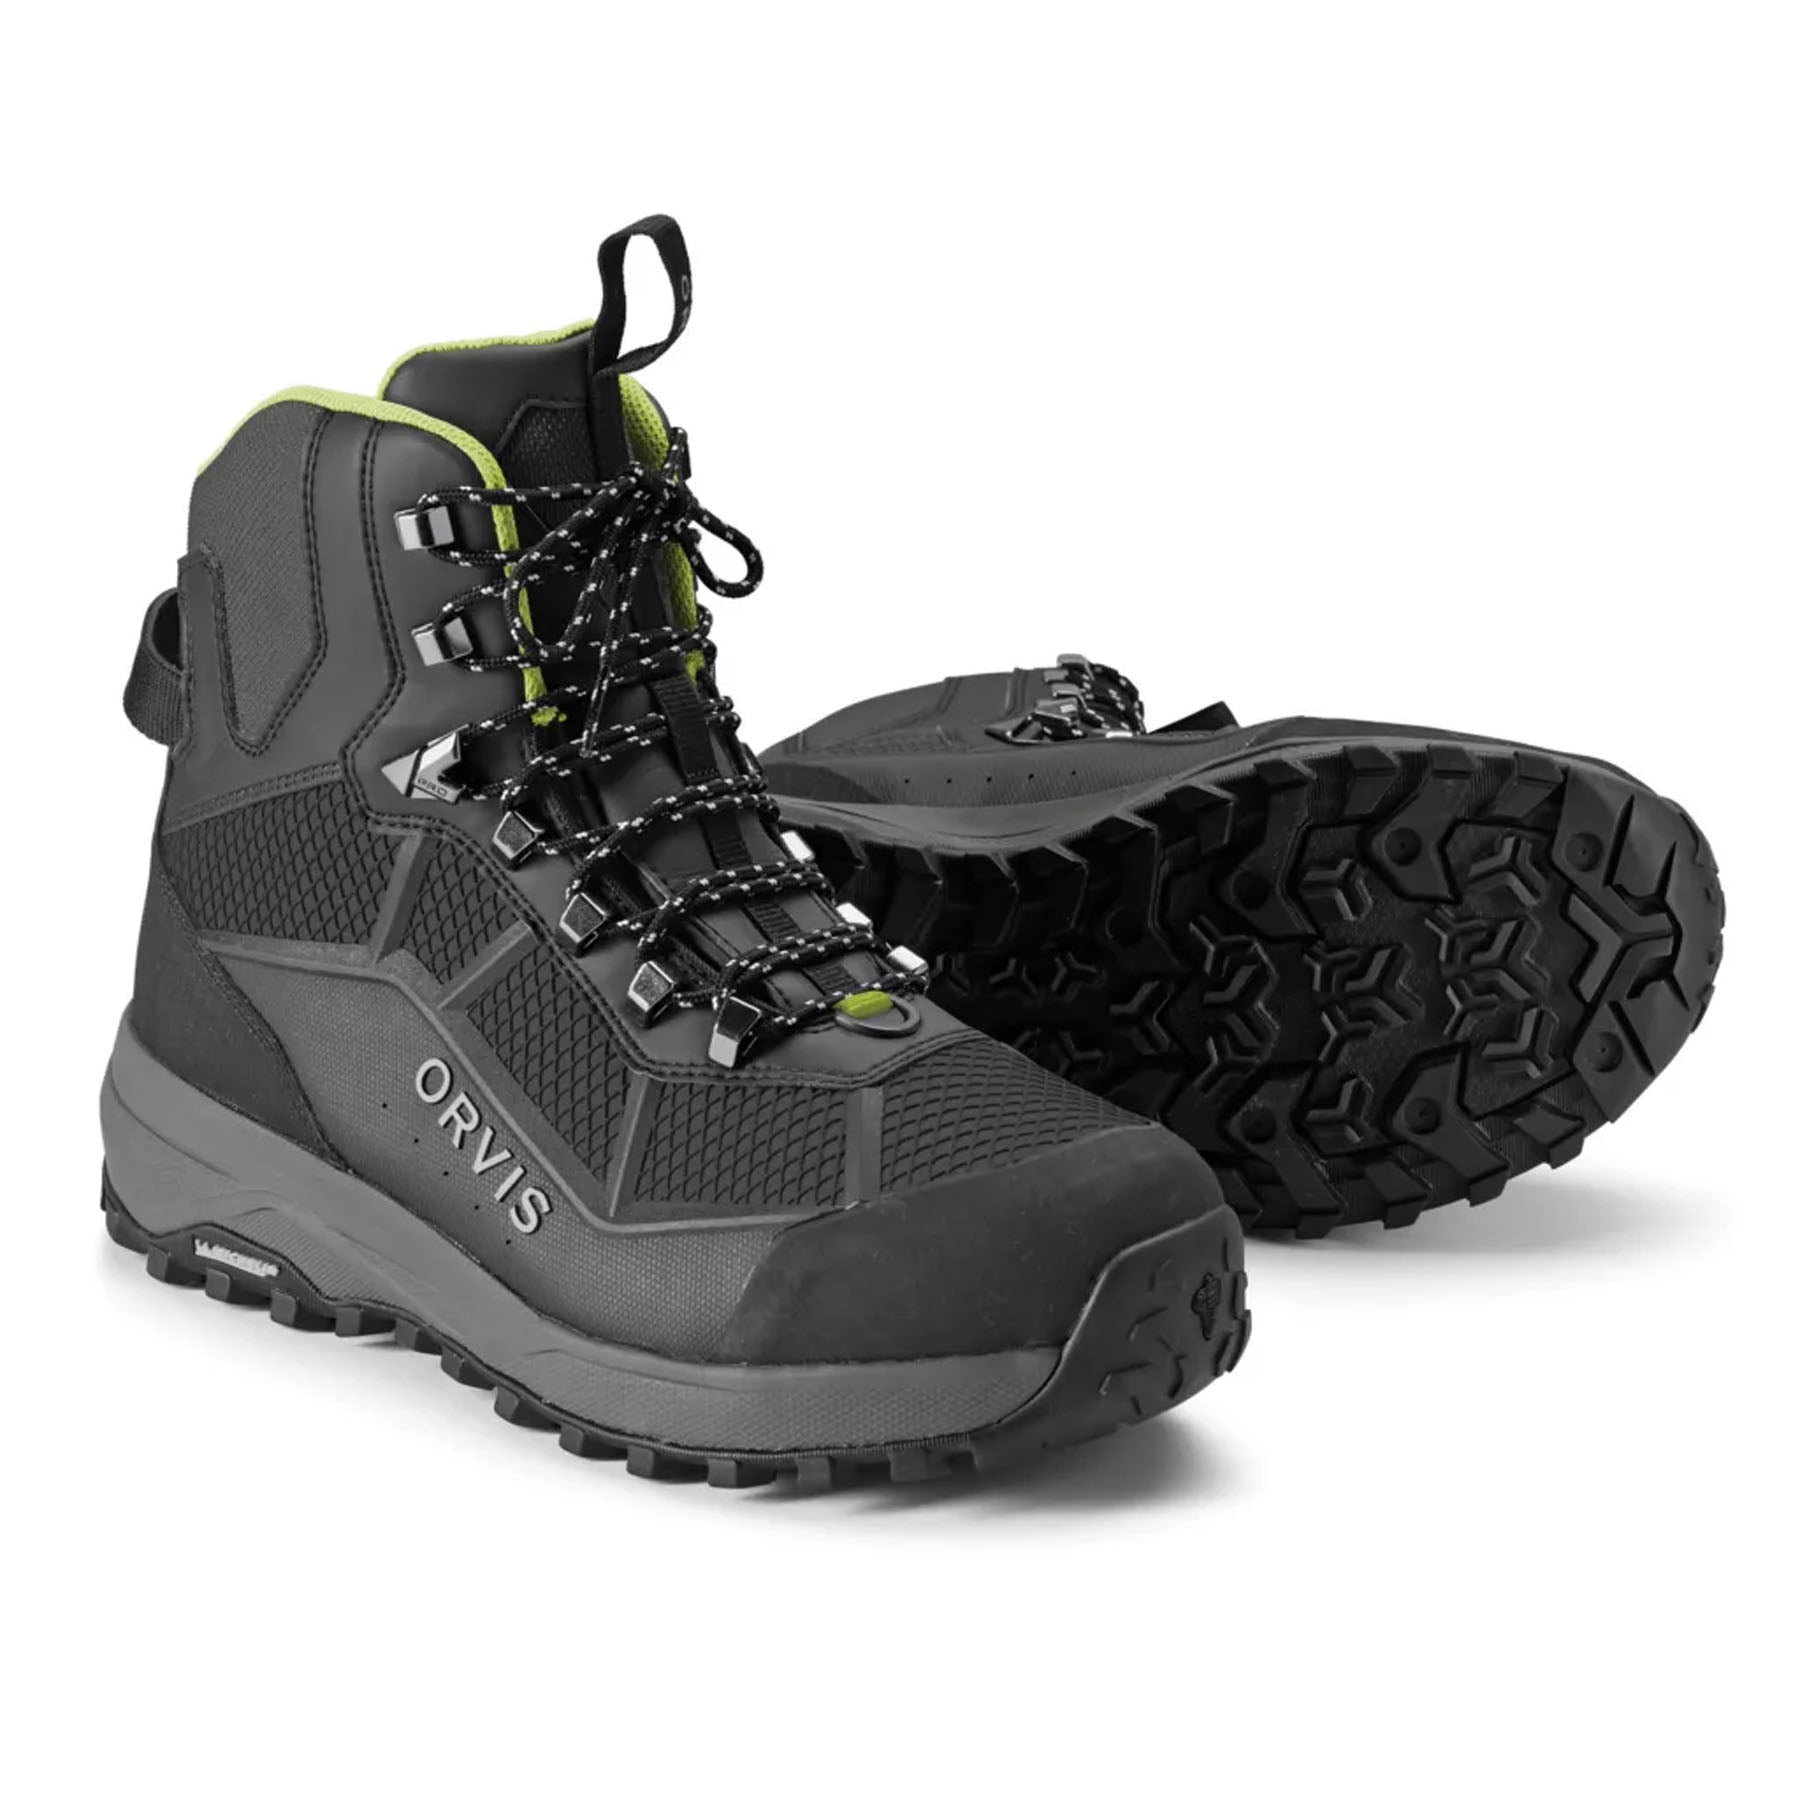 Orvis Pro Wading Boot - Rubber